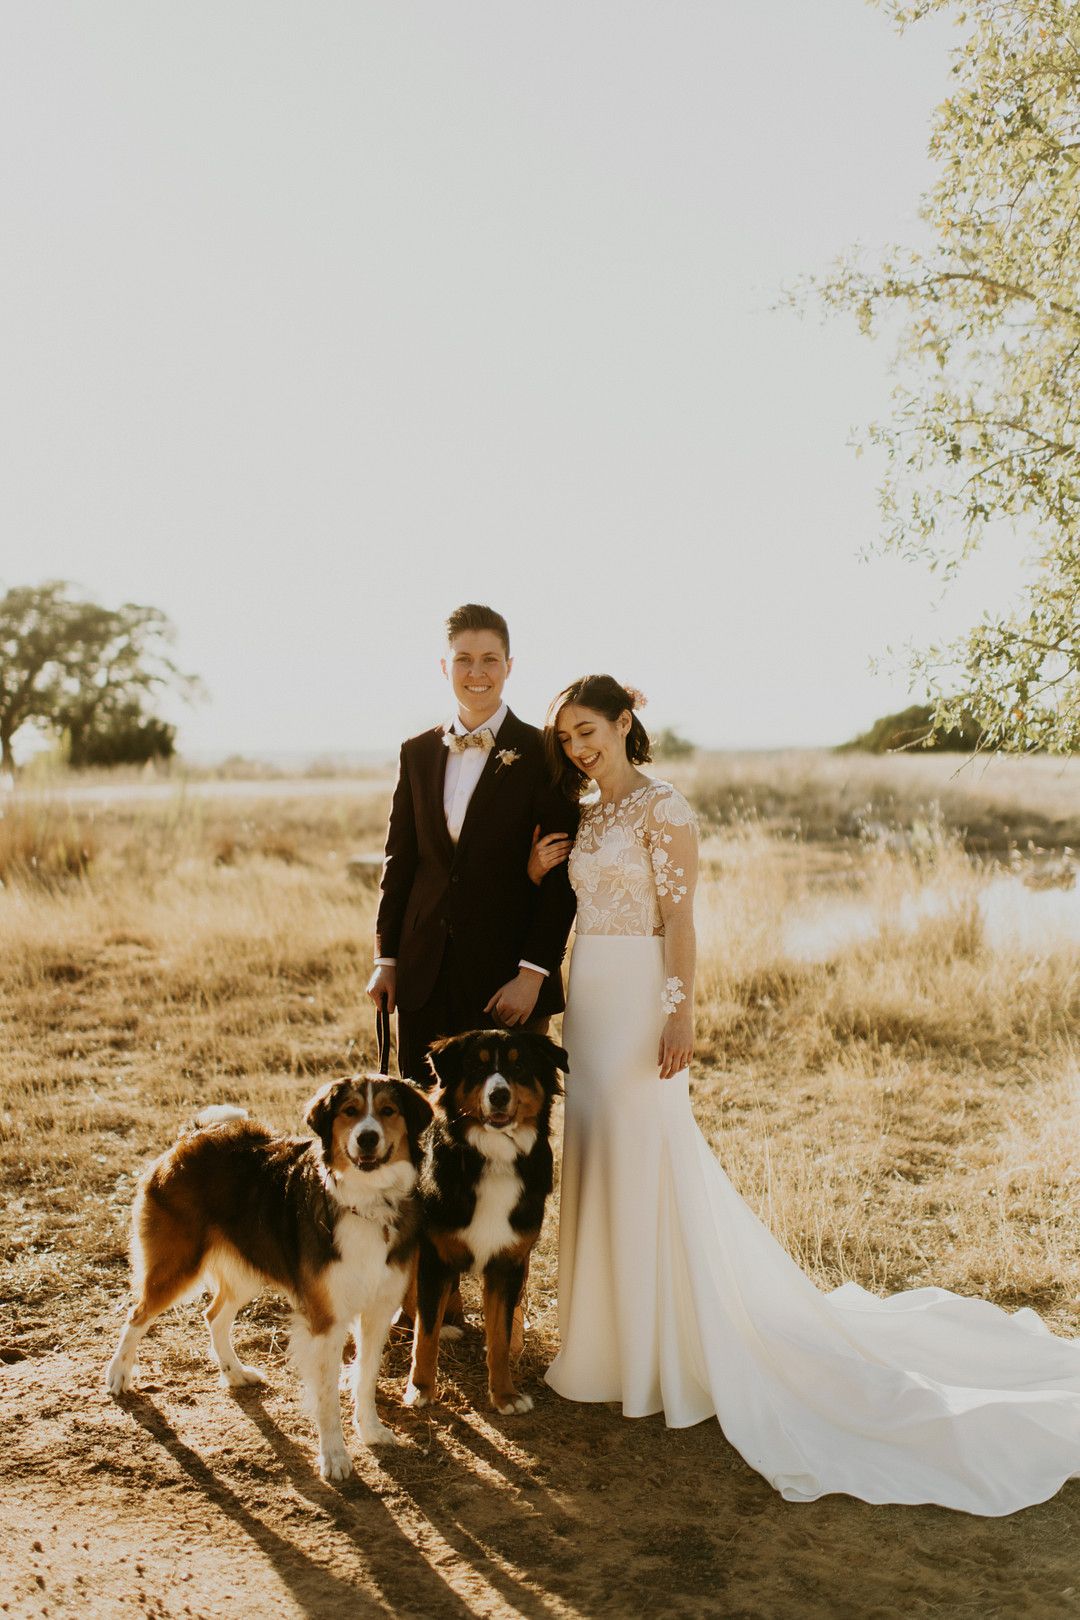 Rustic Farm Wedding in the Texas Hill Country